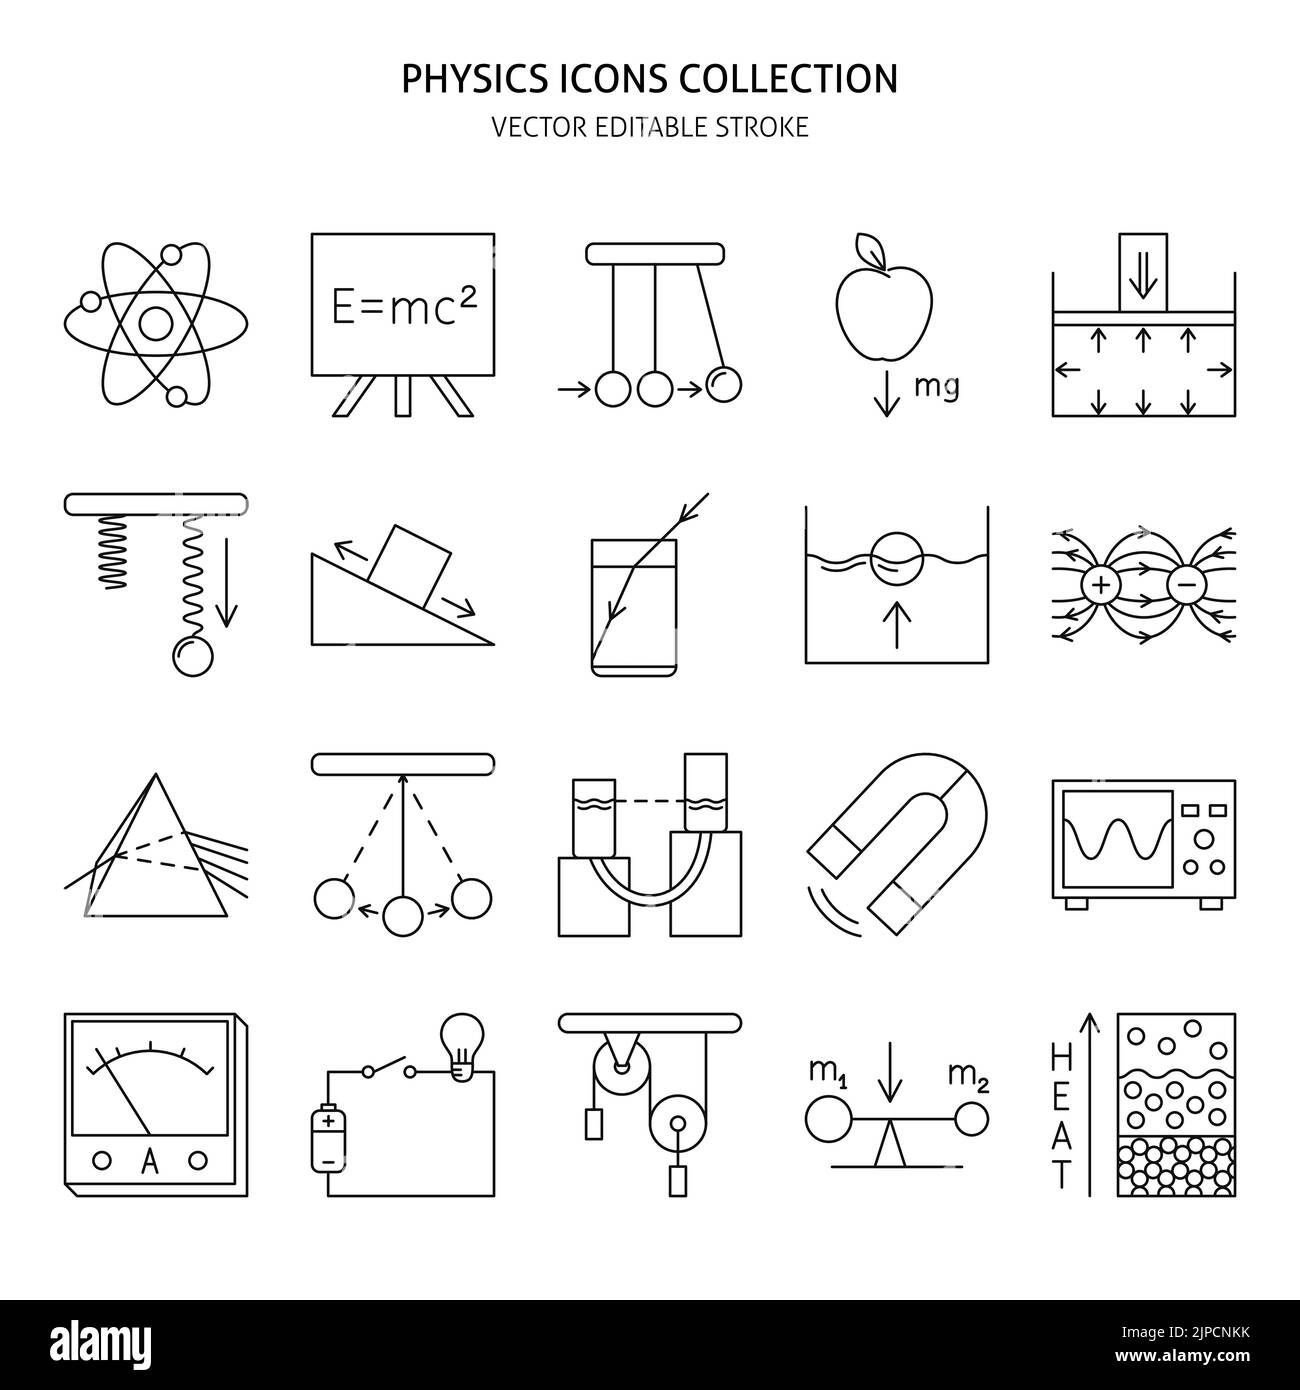 Physics science icon set in line style. Physical laws and symbols. Vector illustration with editable stroke. Stock Vector